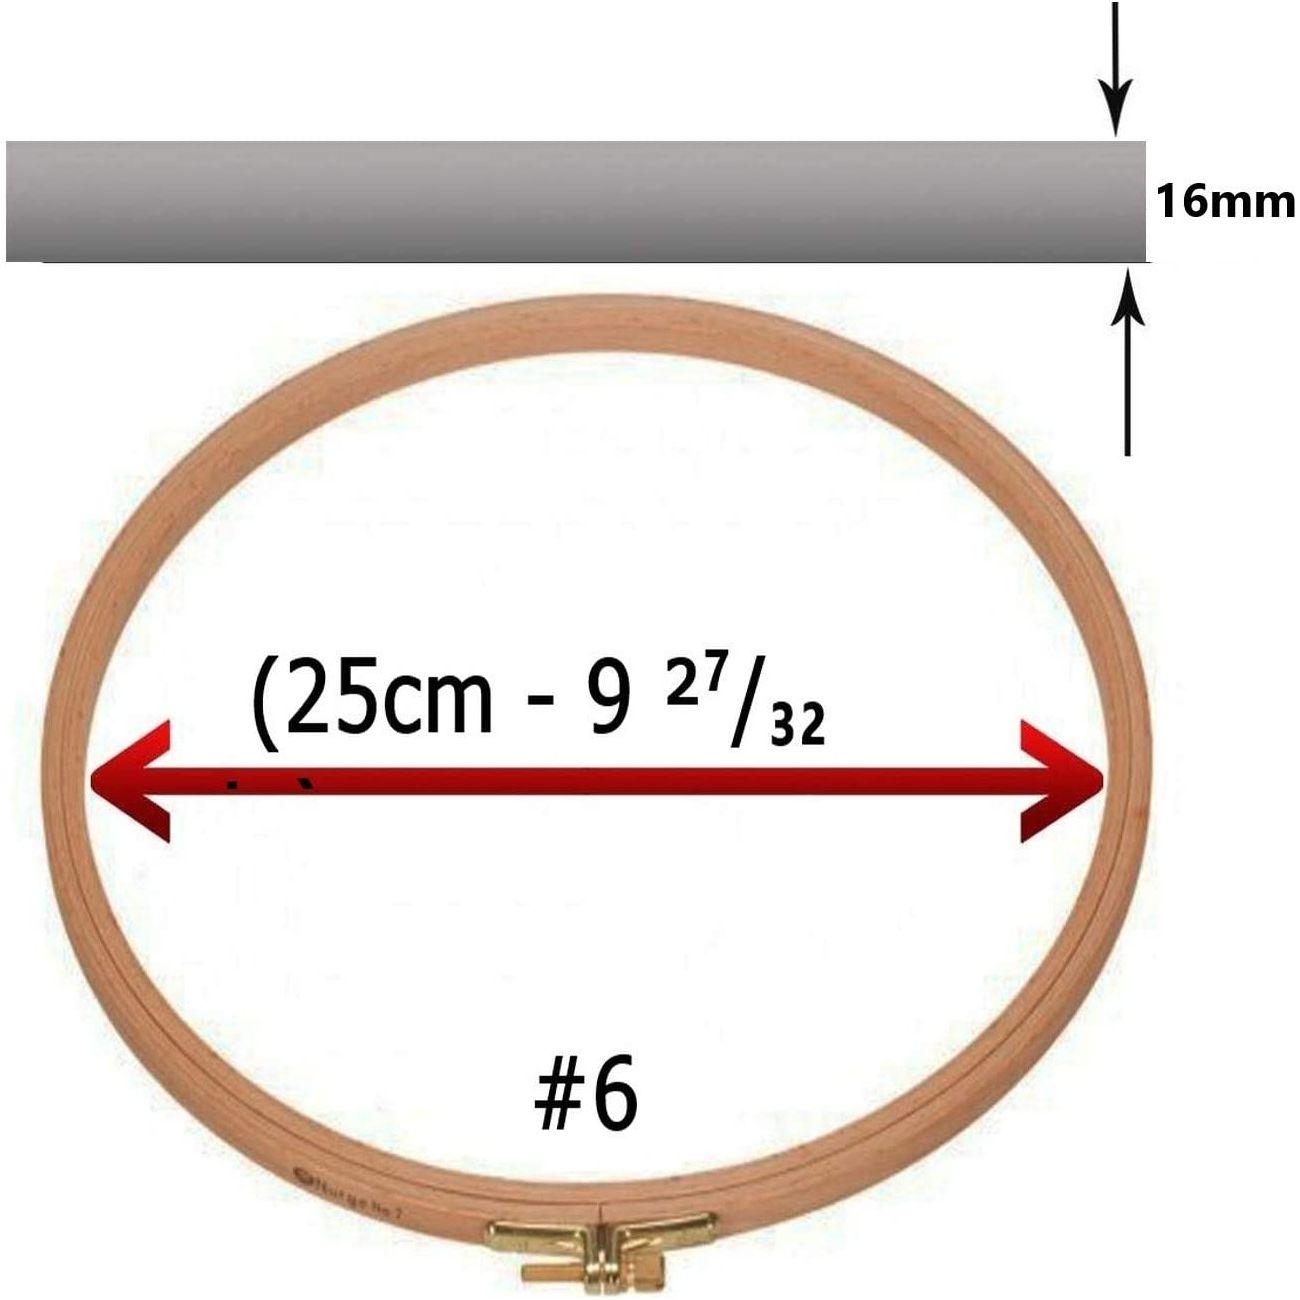 natural beech wood round quilt 16mm embroidery hoop 25cm - 9 ²⁷/₃₂ in